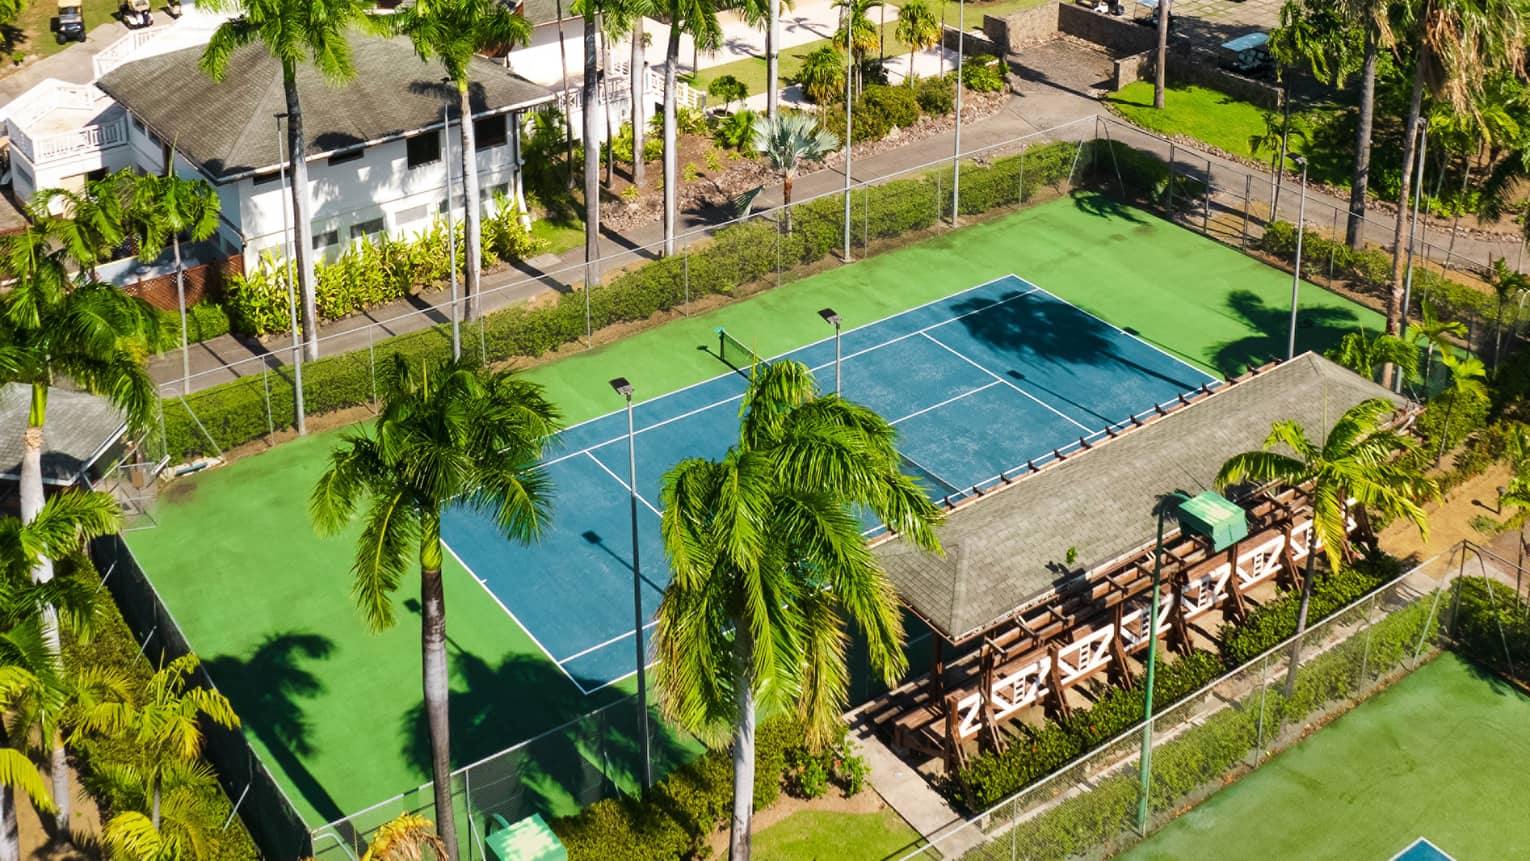 A tennis court surrounded by lush green trees, white building and a mountain in the background.